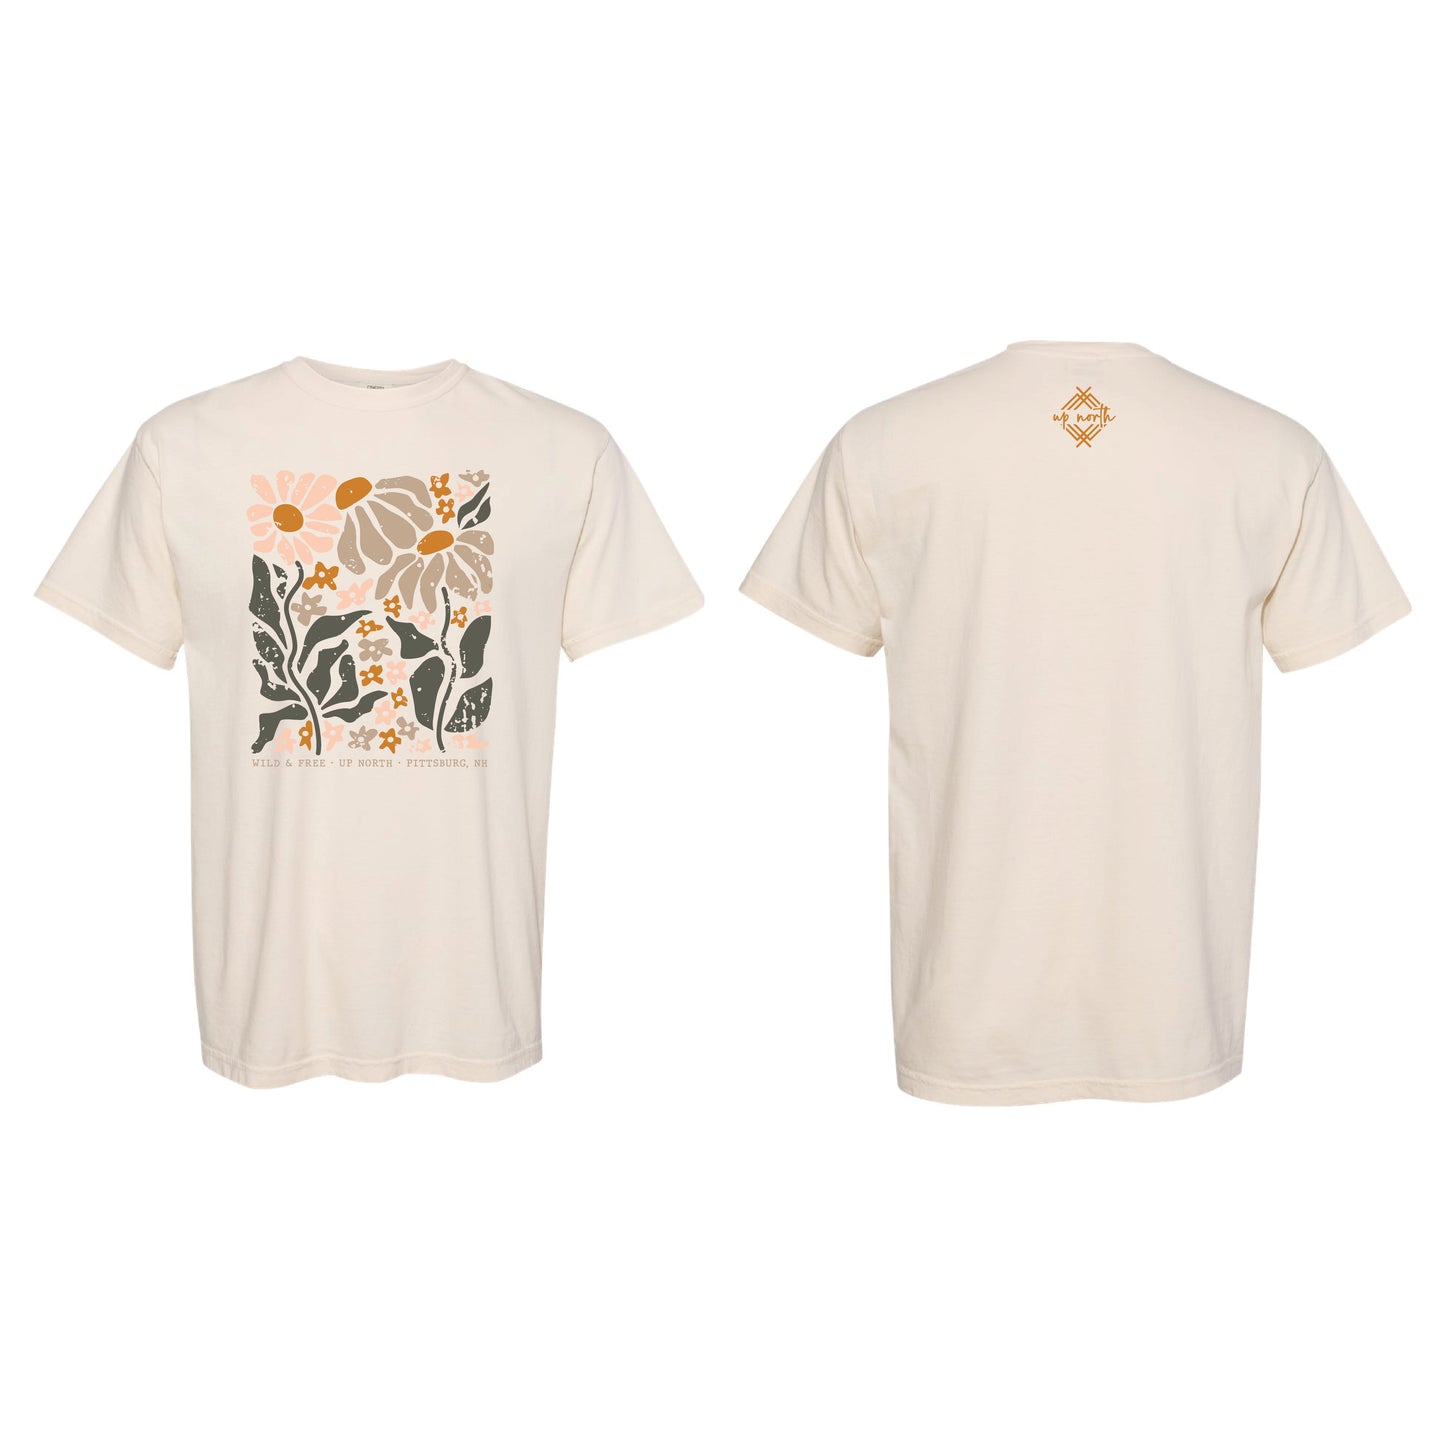 Wild & Free - Washed Graphic Tee